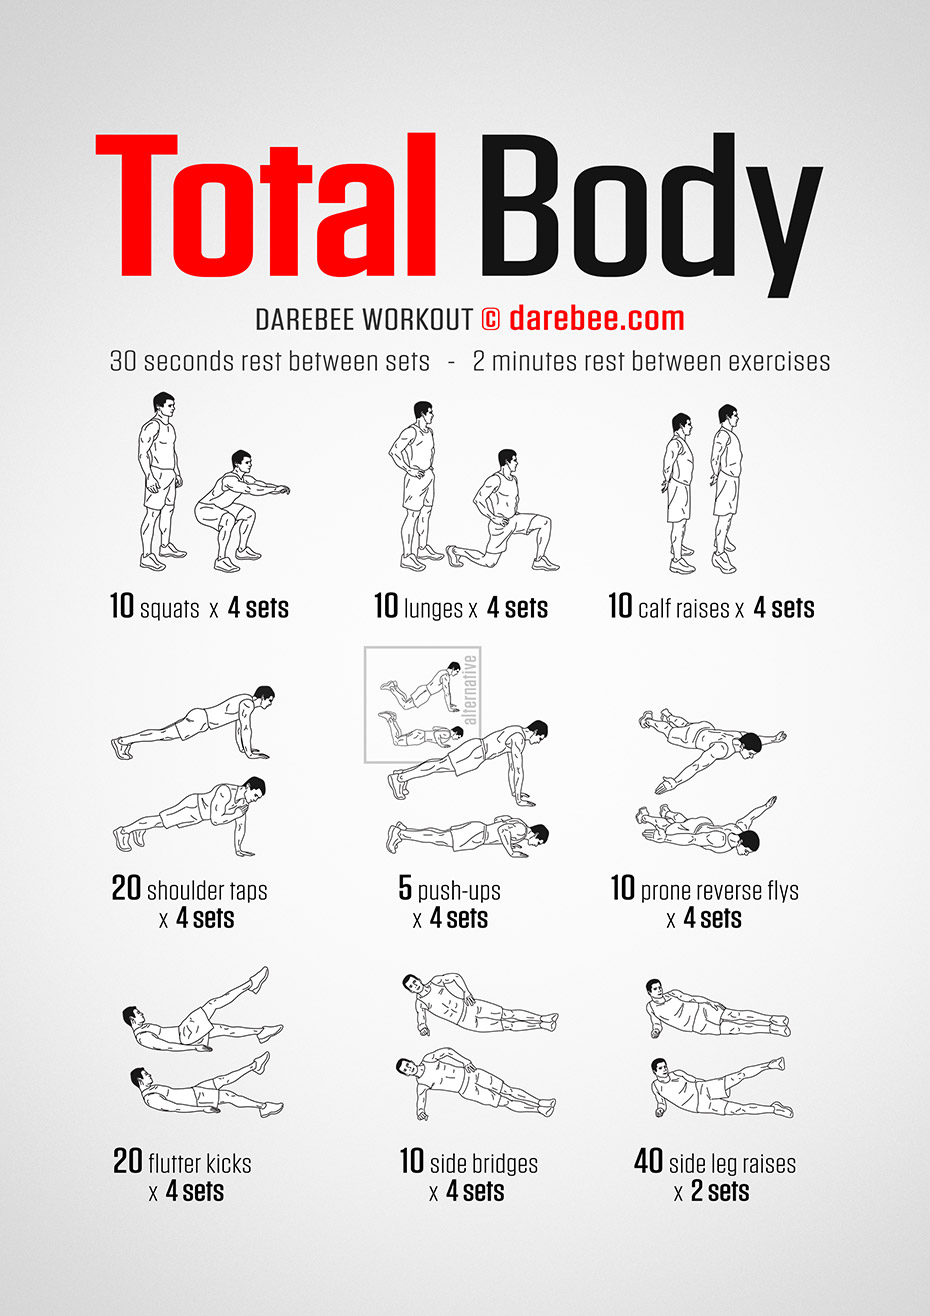 15 Minute Upper Body Workout No Equipment Pdf for Gym